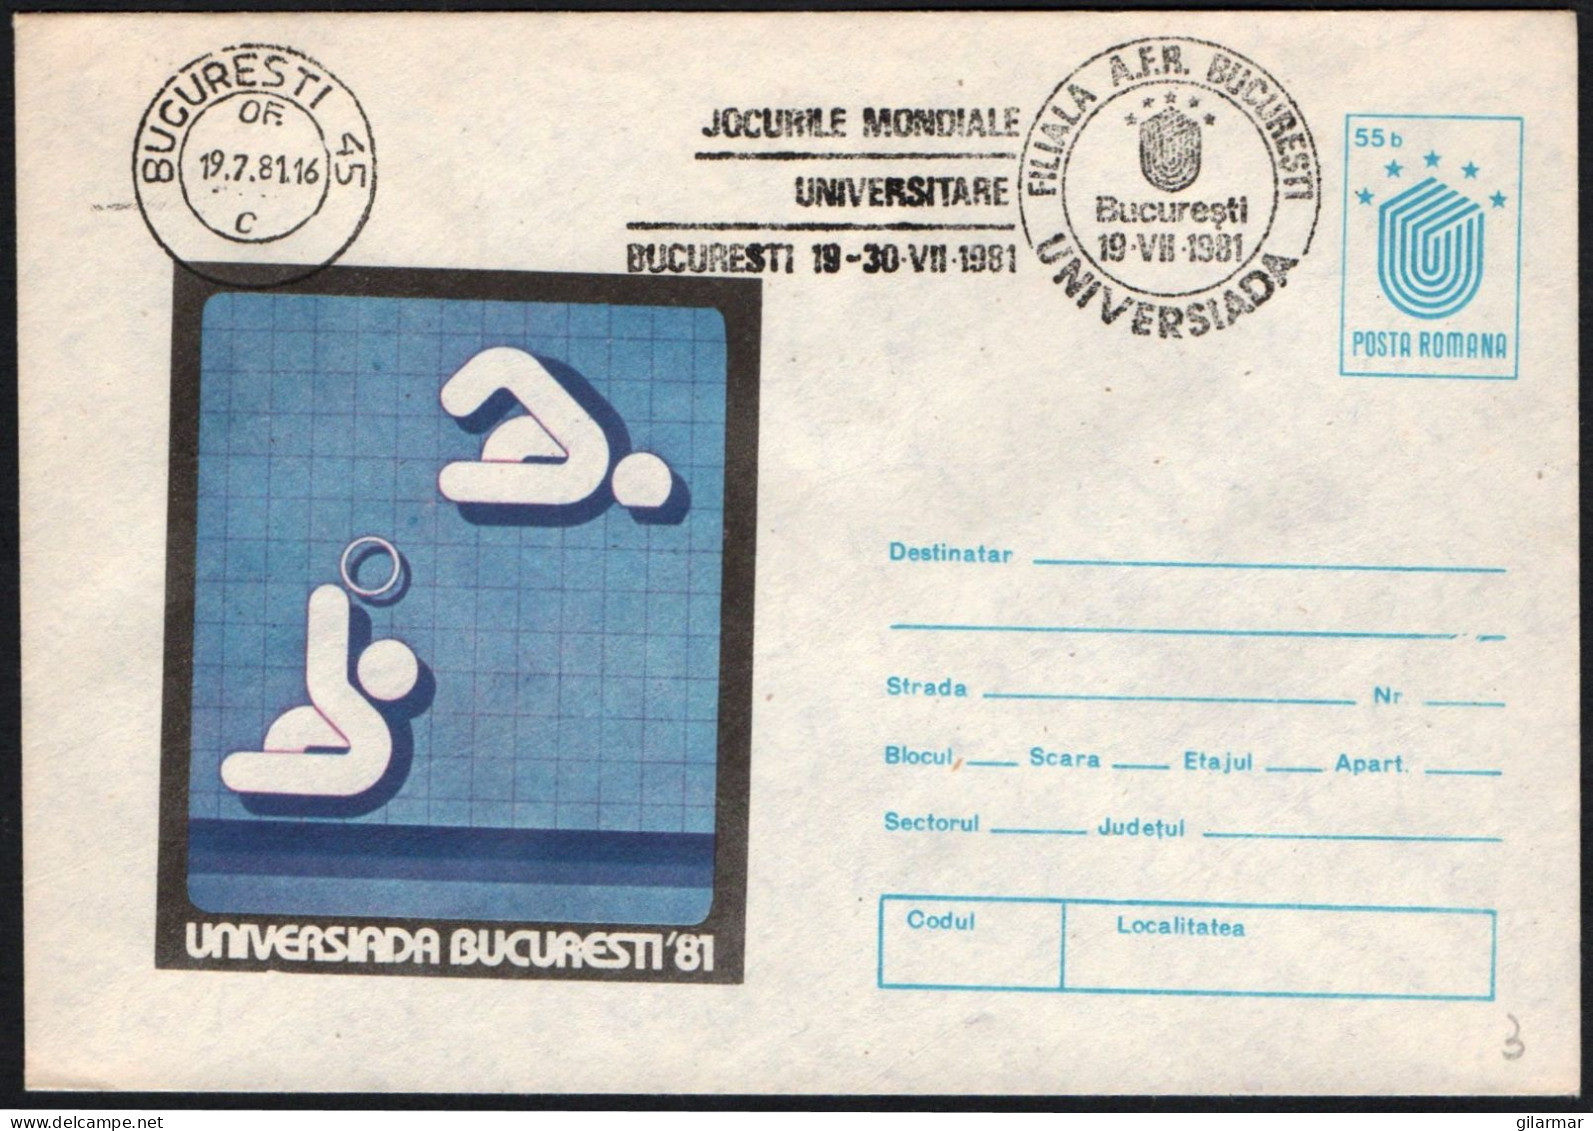 ROMANIA BUCHAREST 1981 - UNIVERSITY GAMES 1981 - STATIONARY: WATER POLO - G - Water-Polo